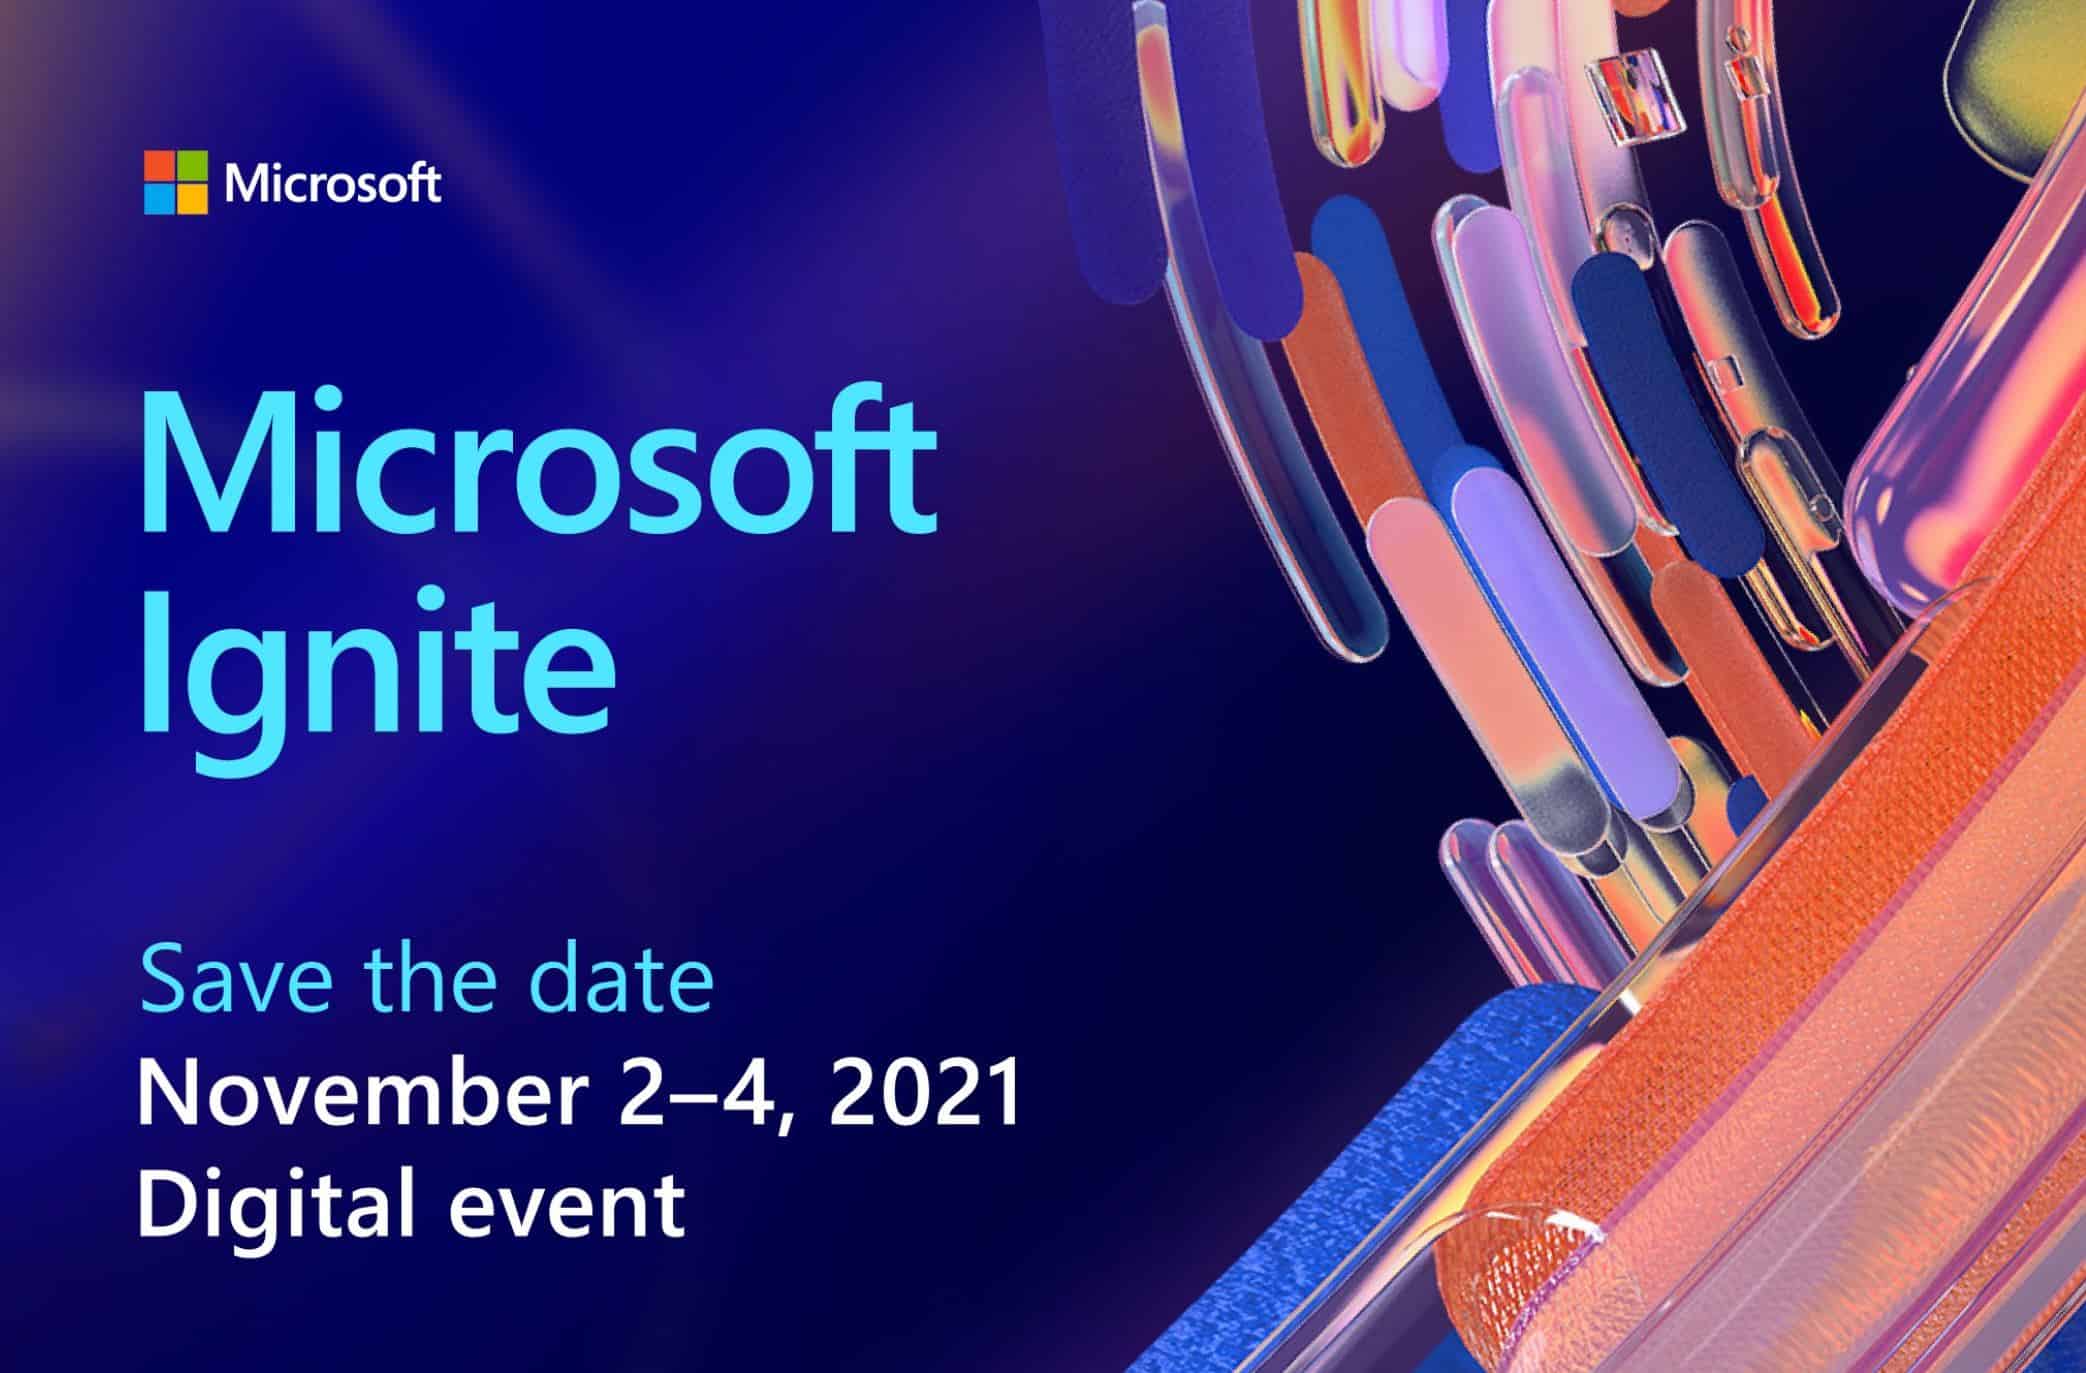 Microsoft Ignite conference is coming digitally on November 24, 2021